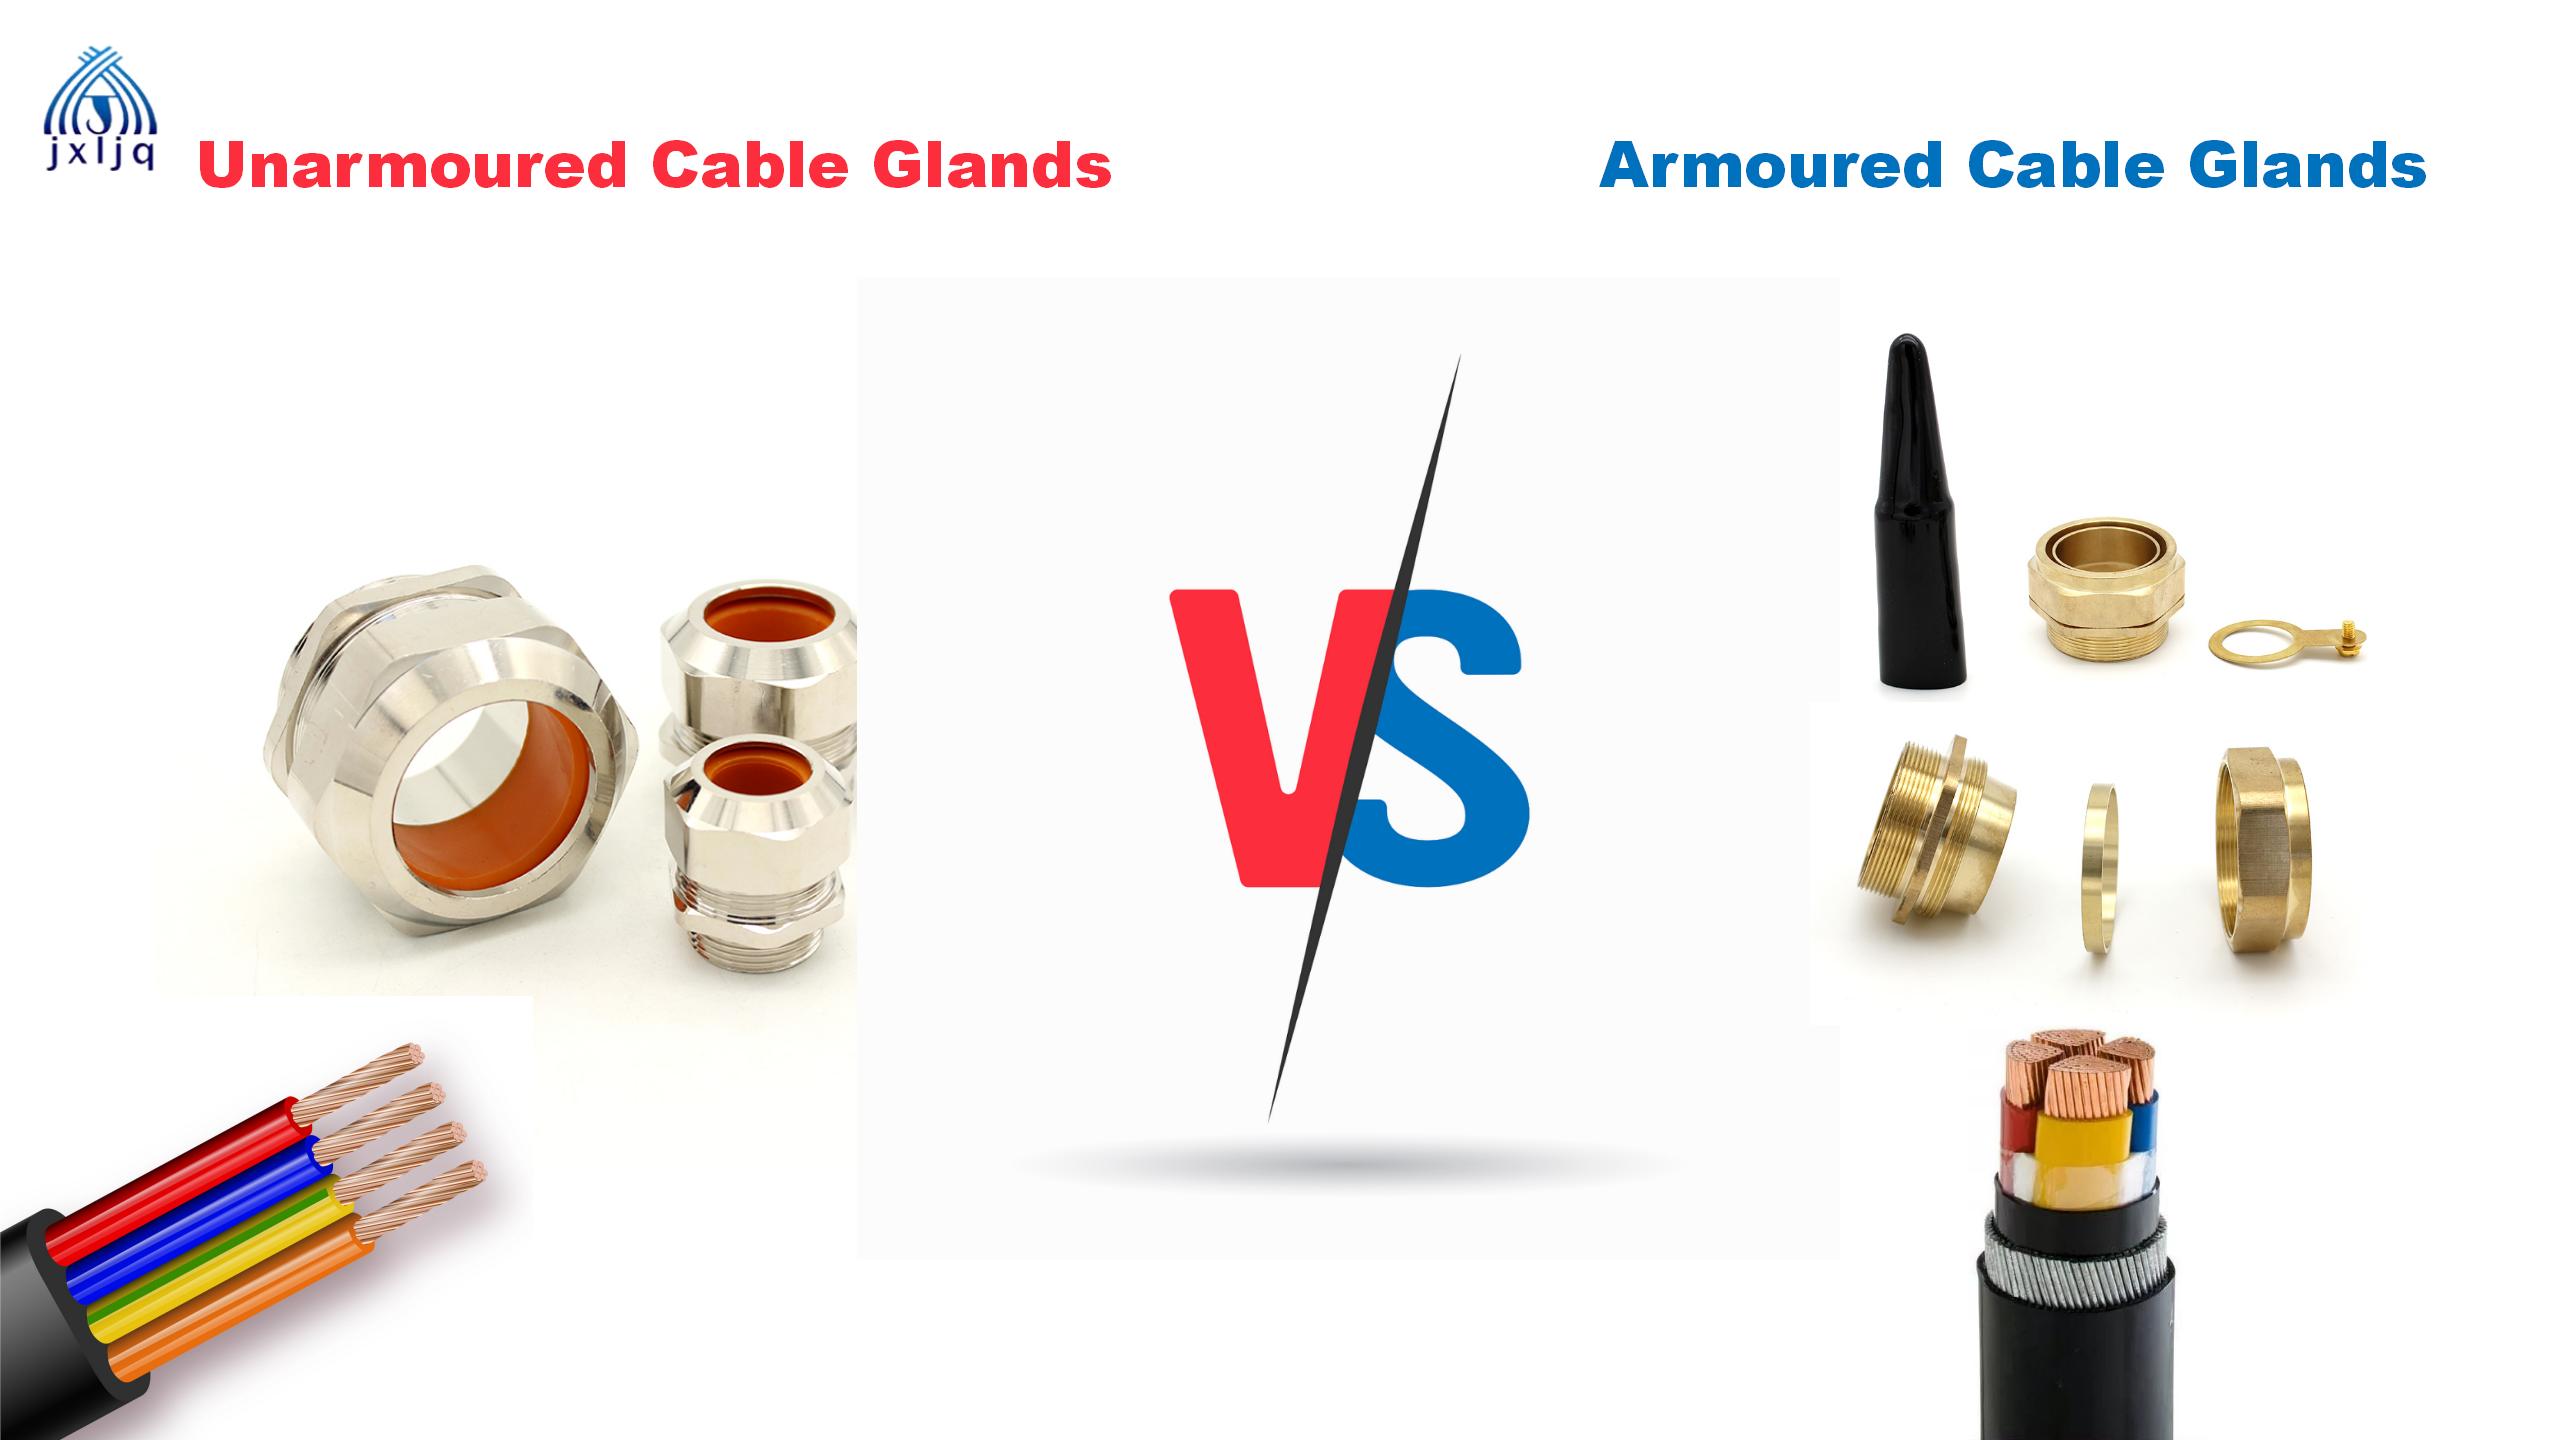 Tout bagay sou Armored Cable Gland